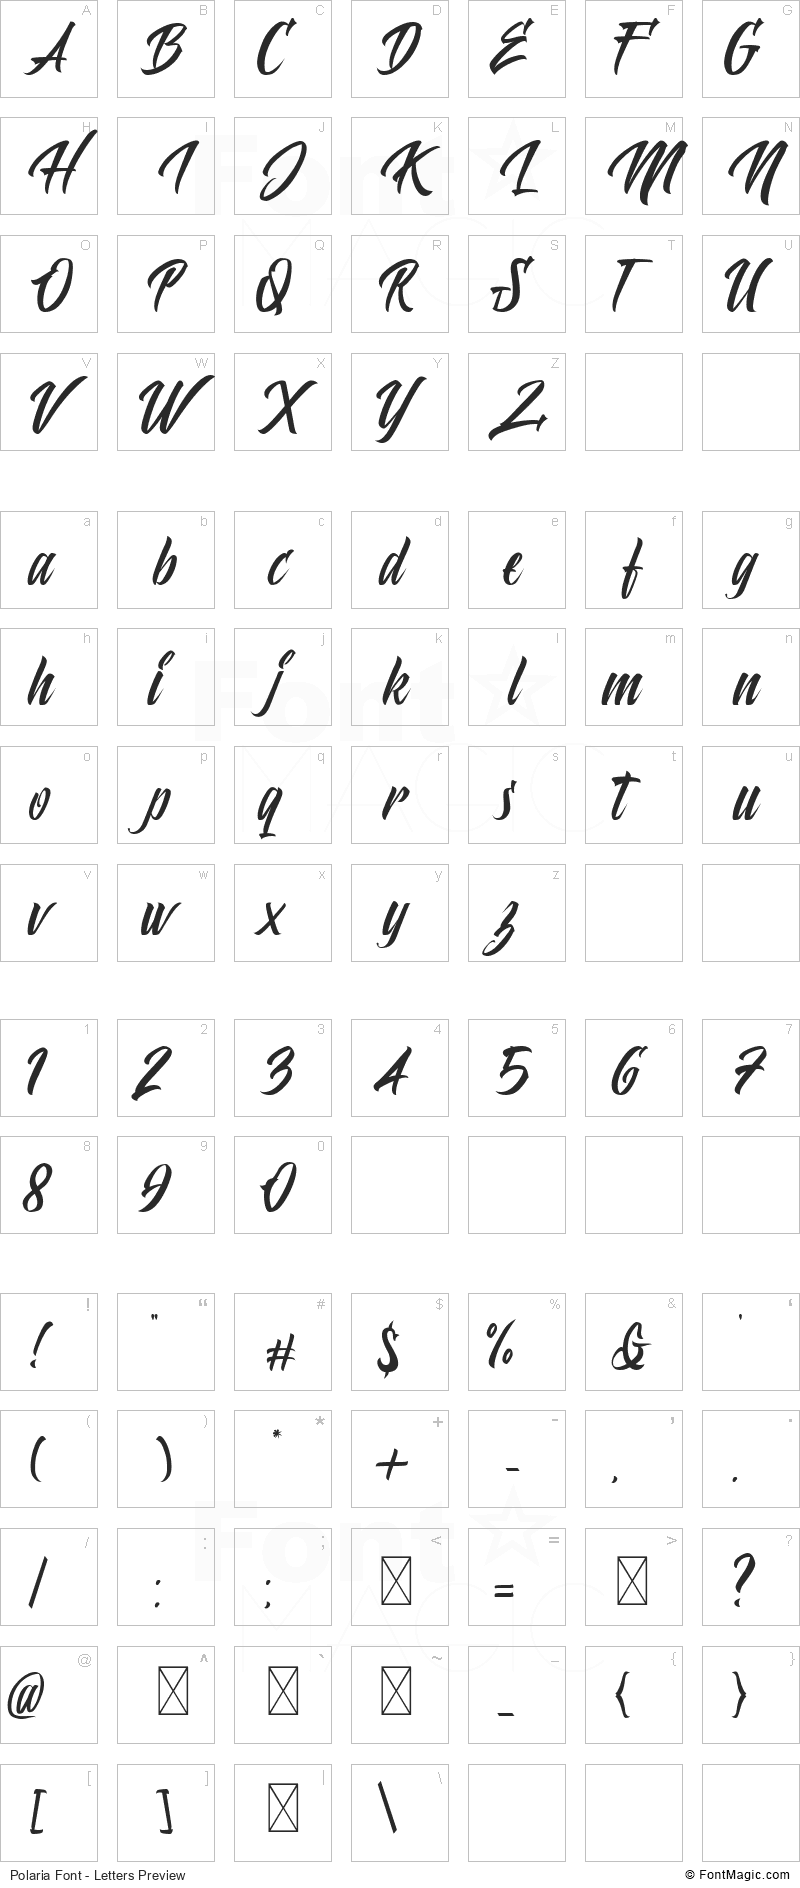 Polaria Font - All Latters Preview Chart